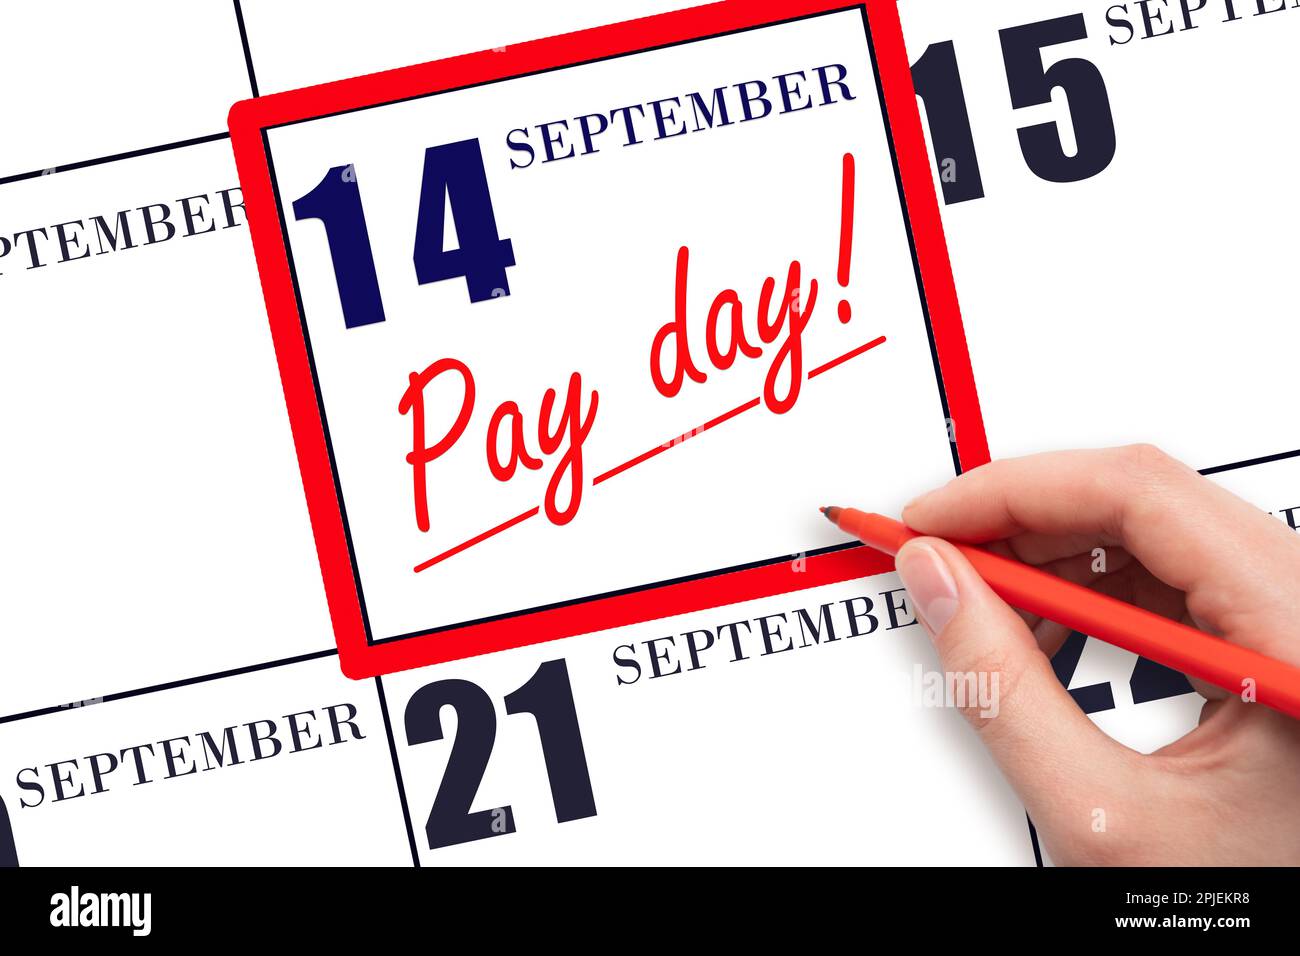 14th day of September. Hand writing text PAY DATE on calendar date September 14 and underline it. Payment due date. Reminder concept of payment. Autum Stock Photo